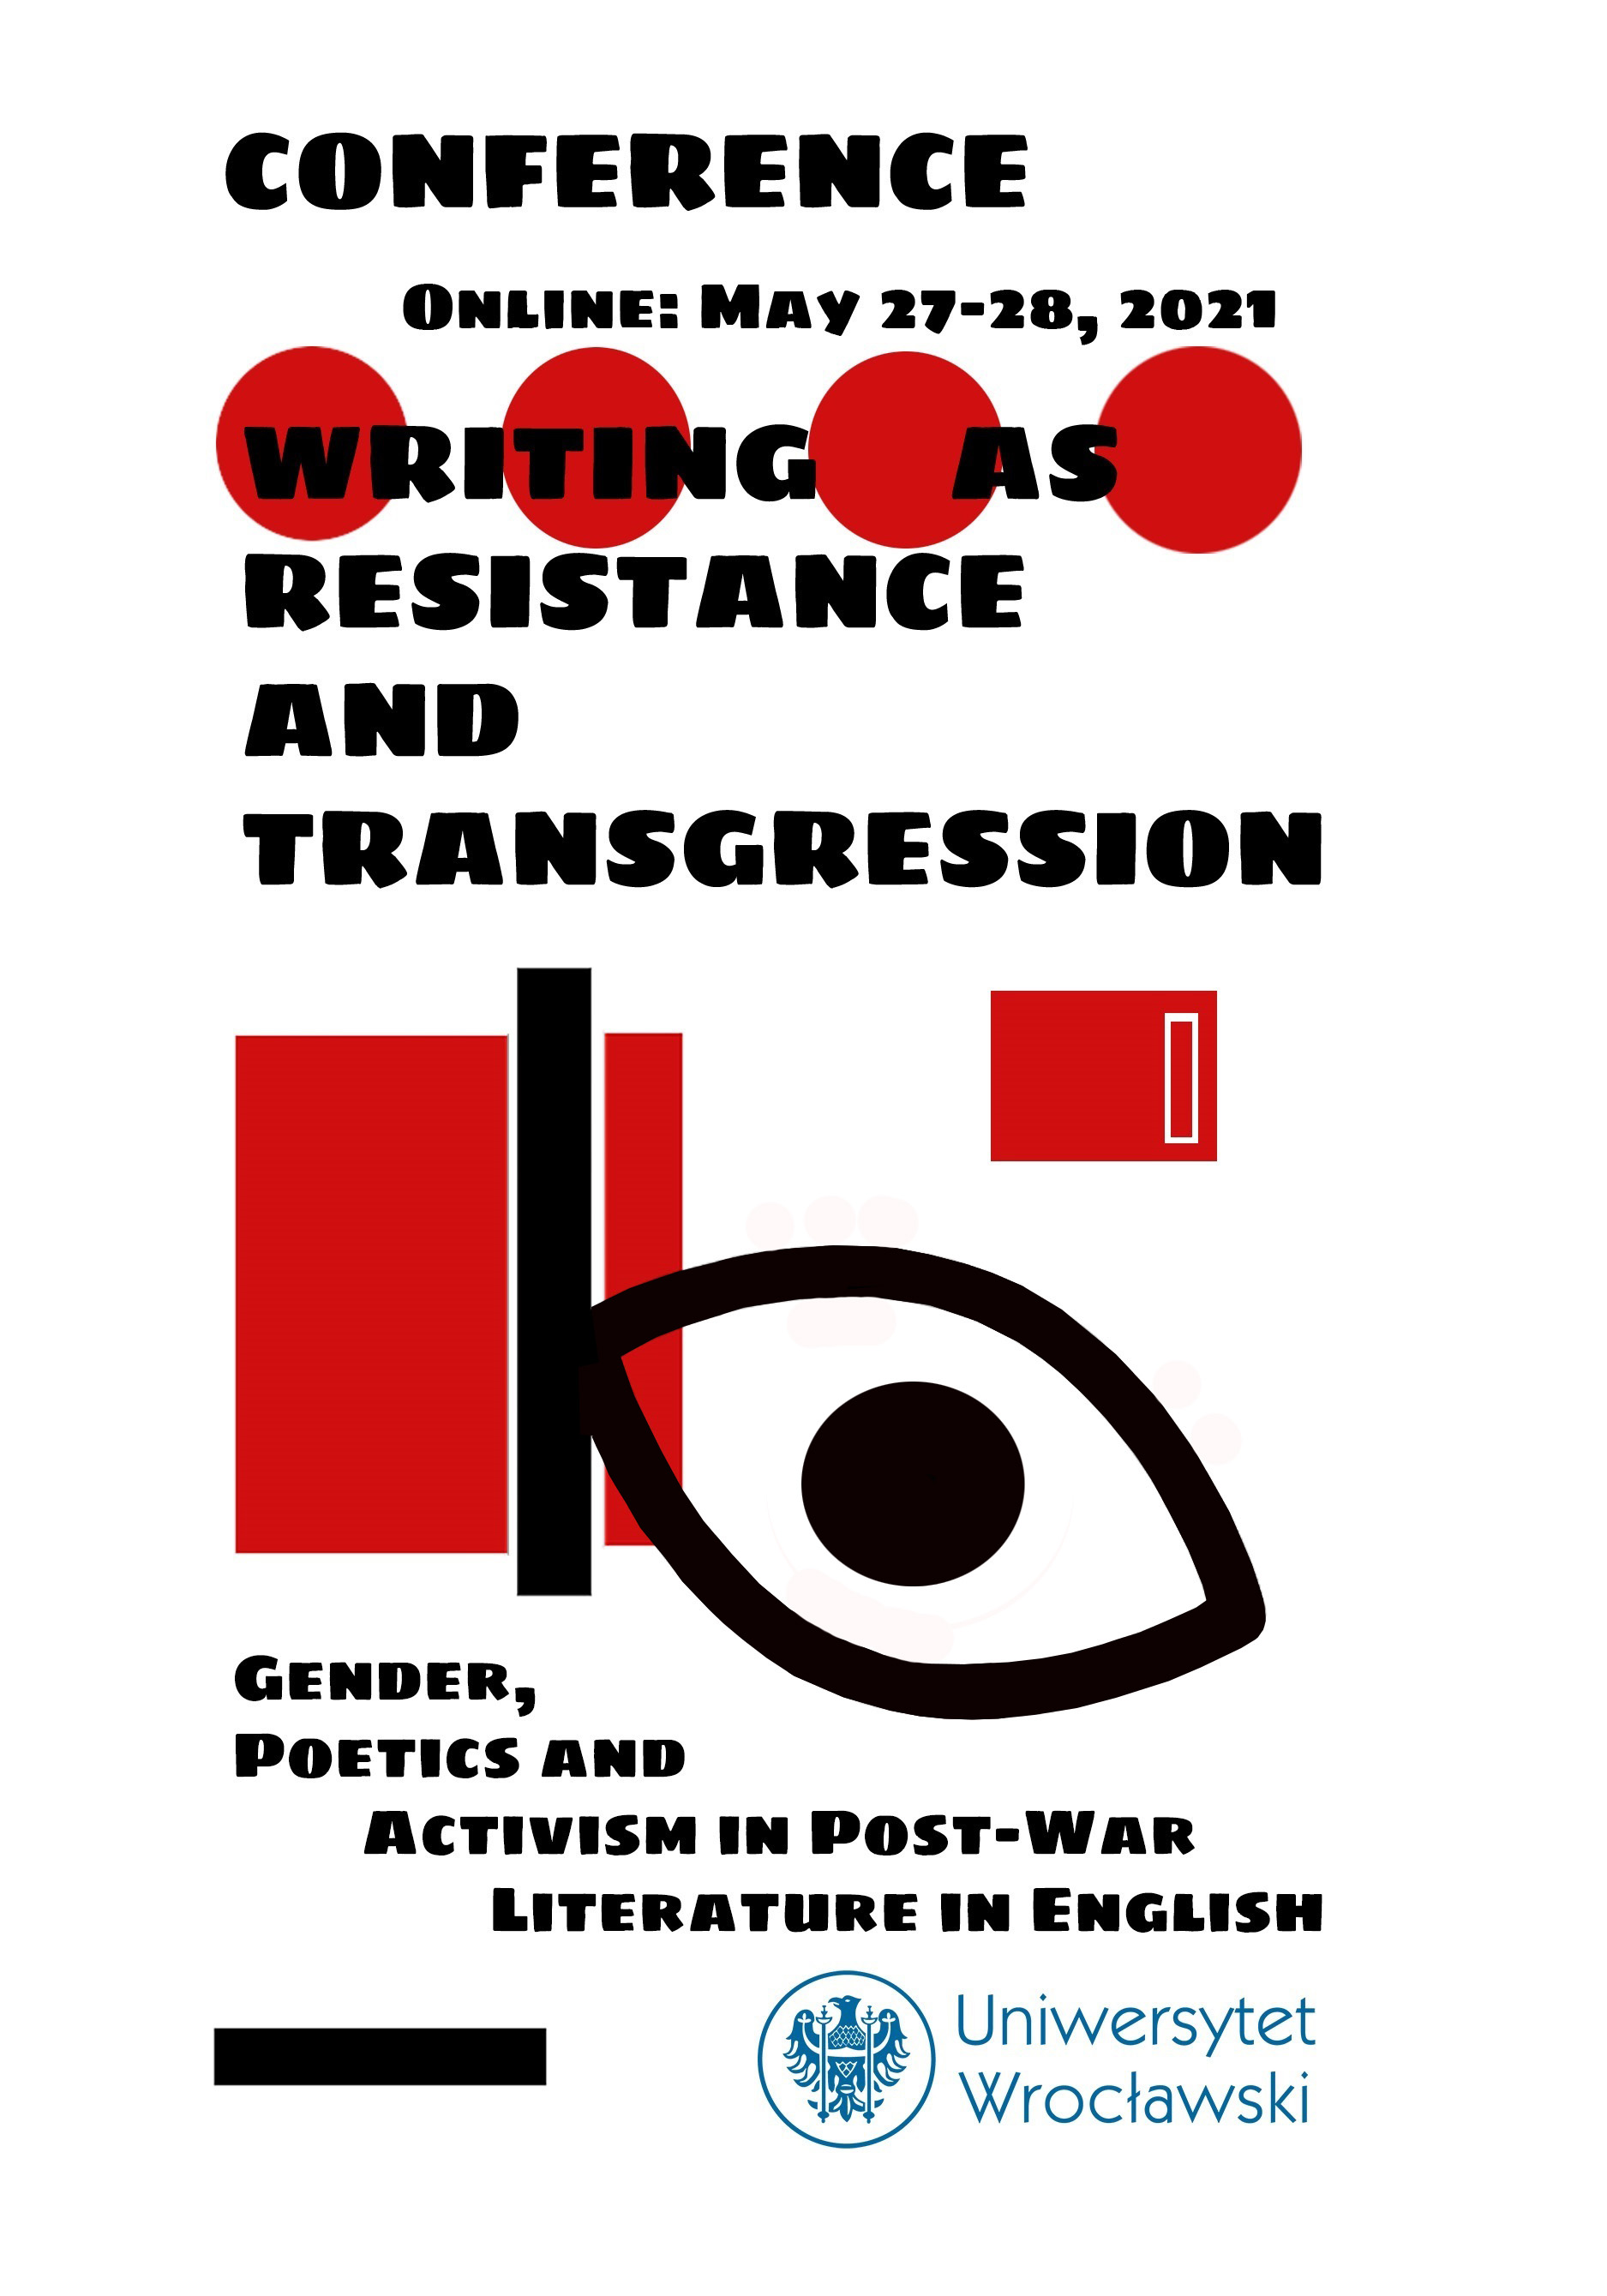 Attachment post-531214-Poster_WritingAsResistance_UWr_IFA_Conference.jpg